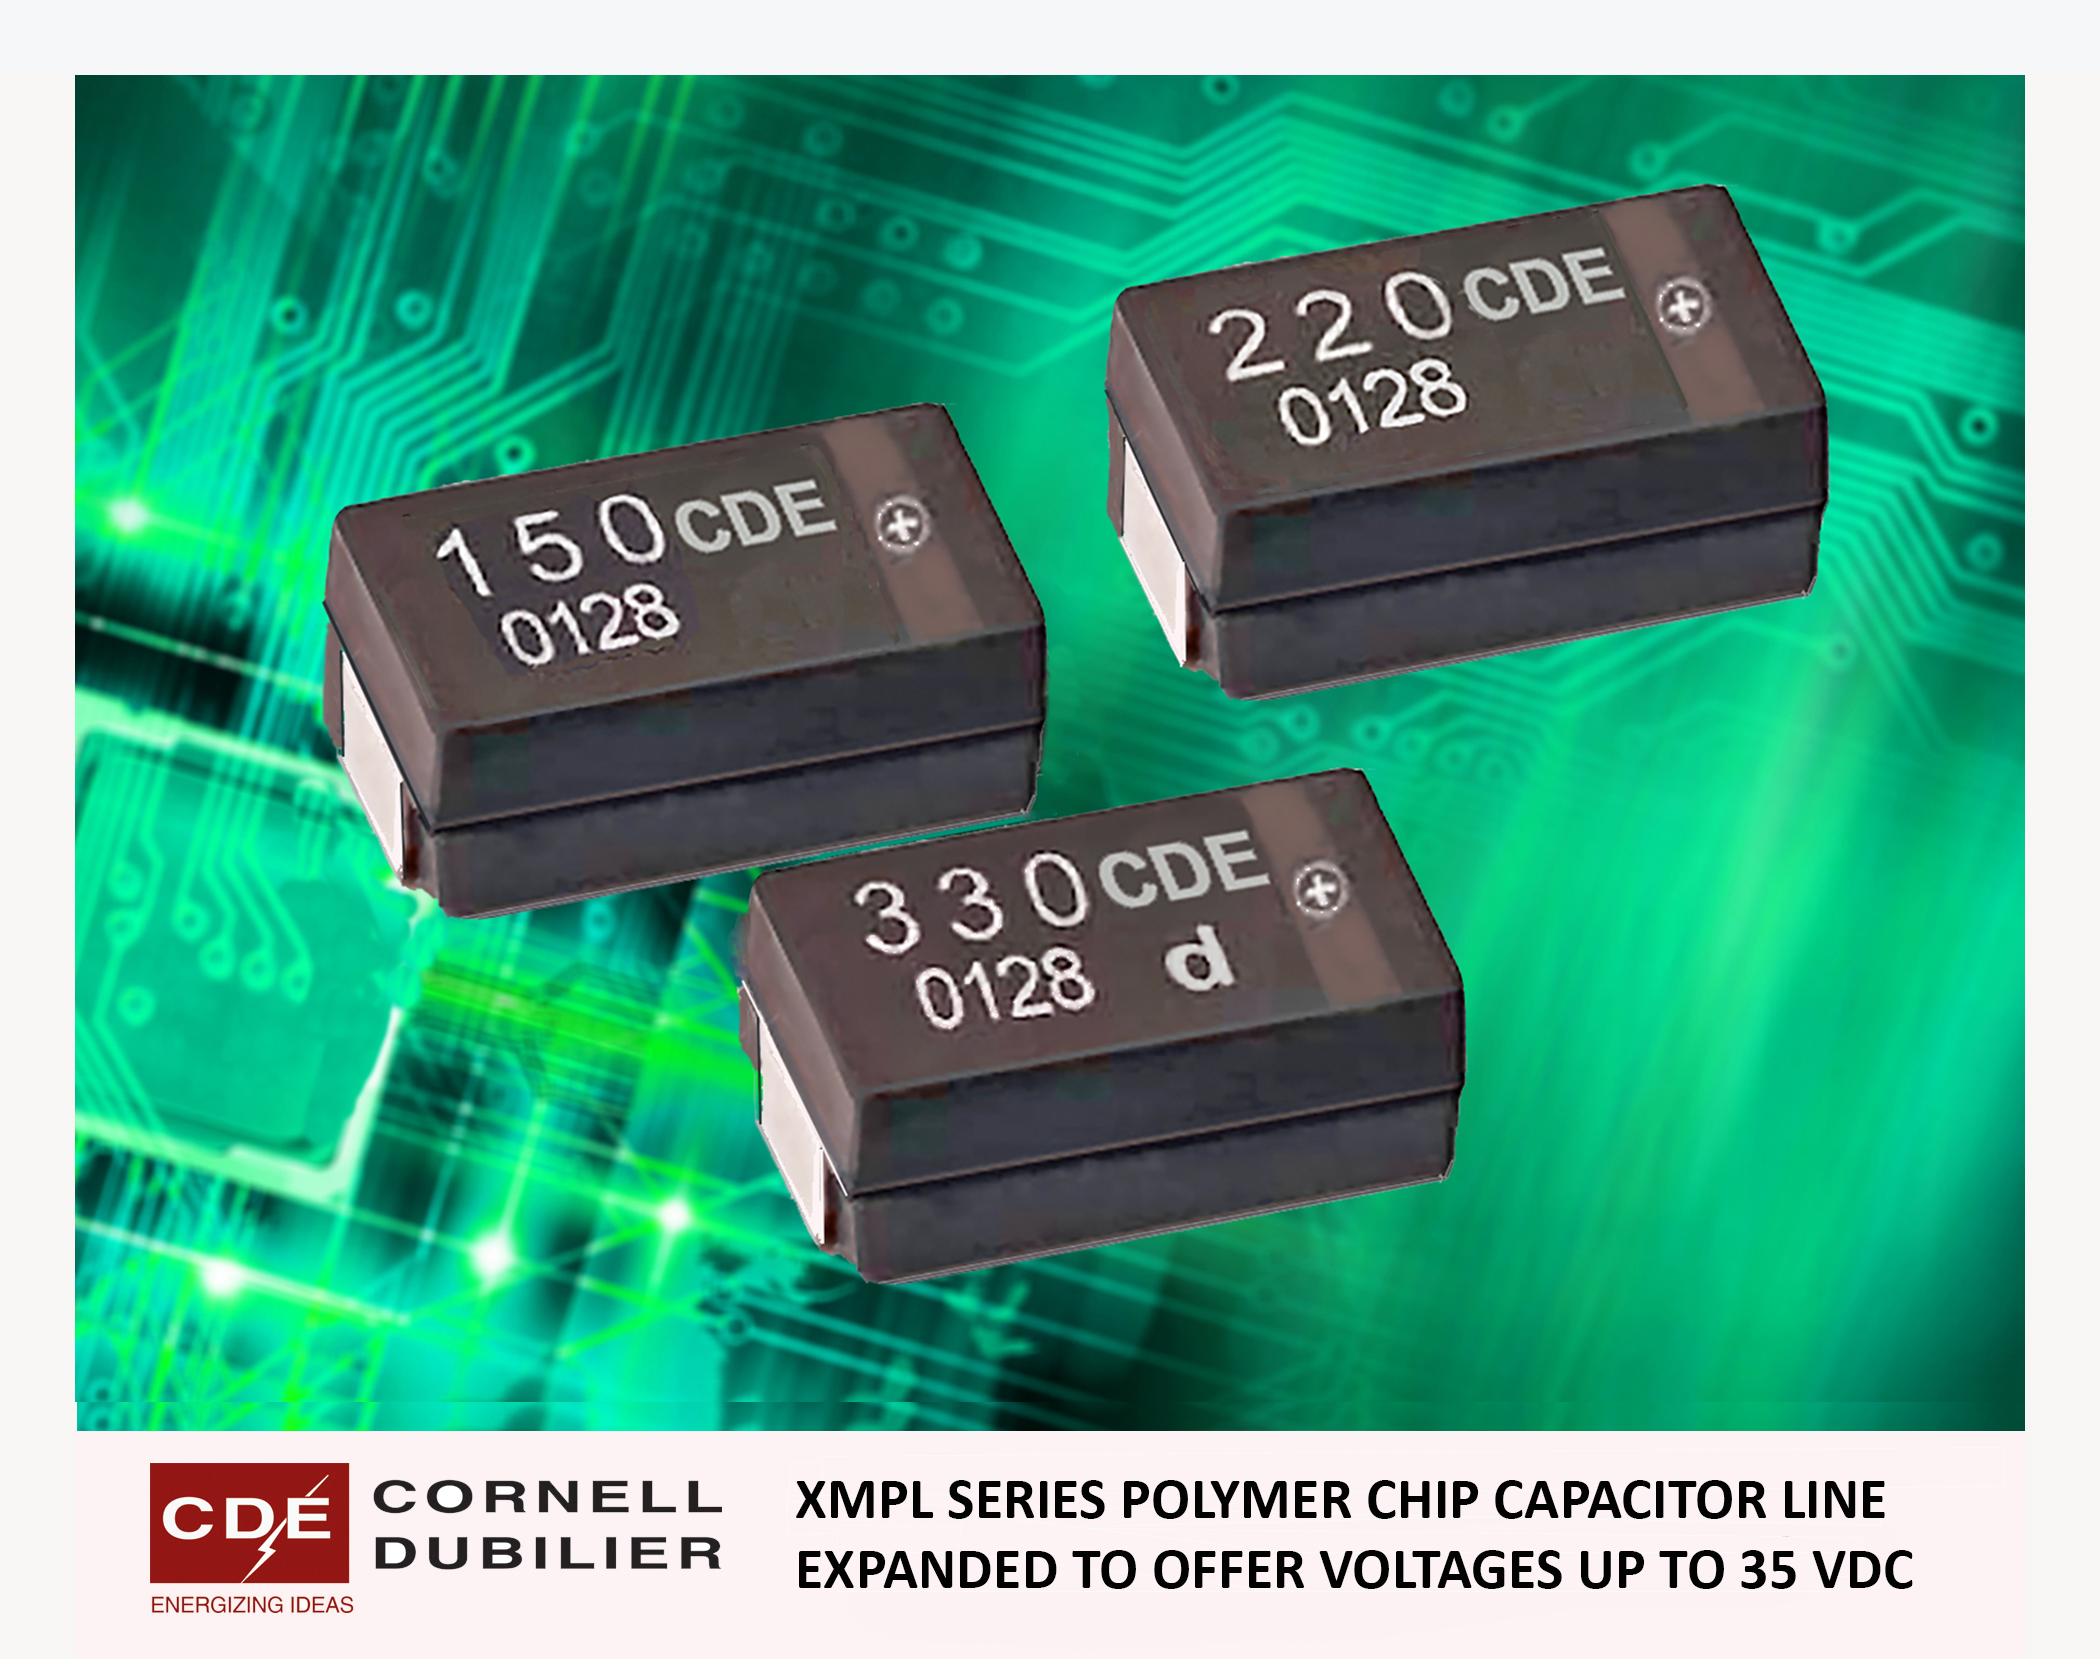 CDE Polymer Chip Capacitor Line Expanded to 35VDC